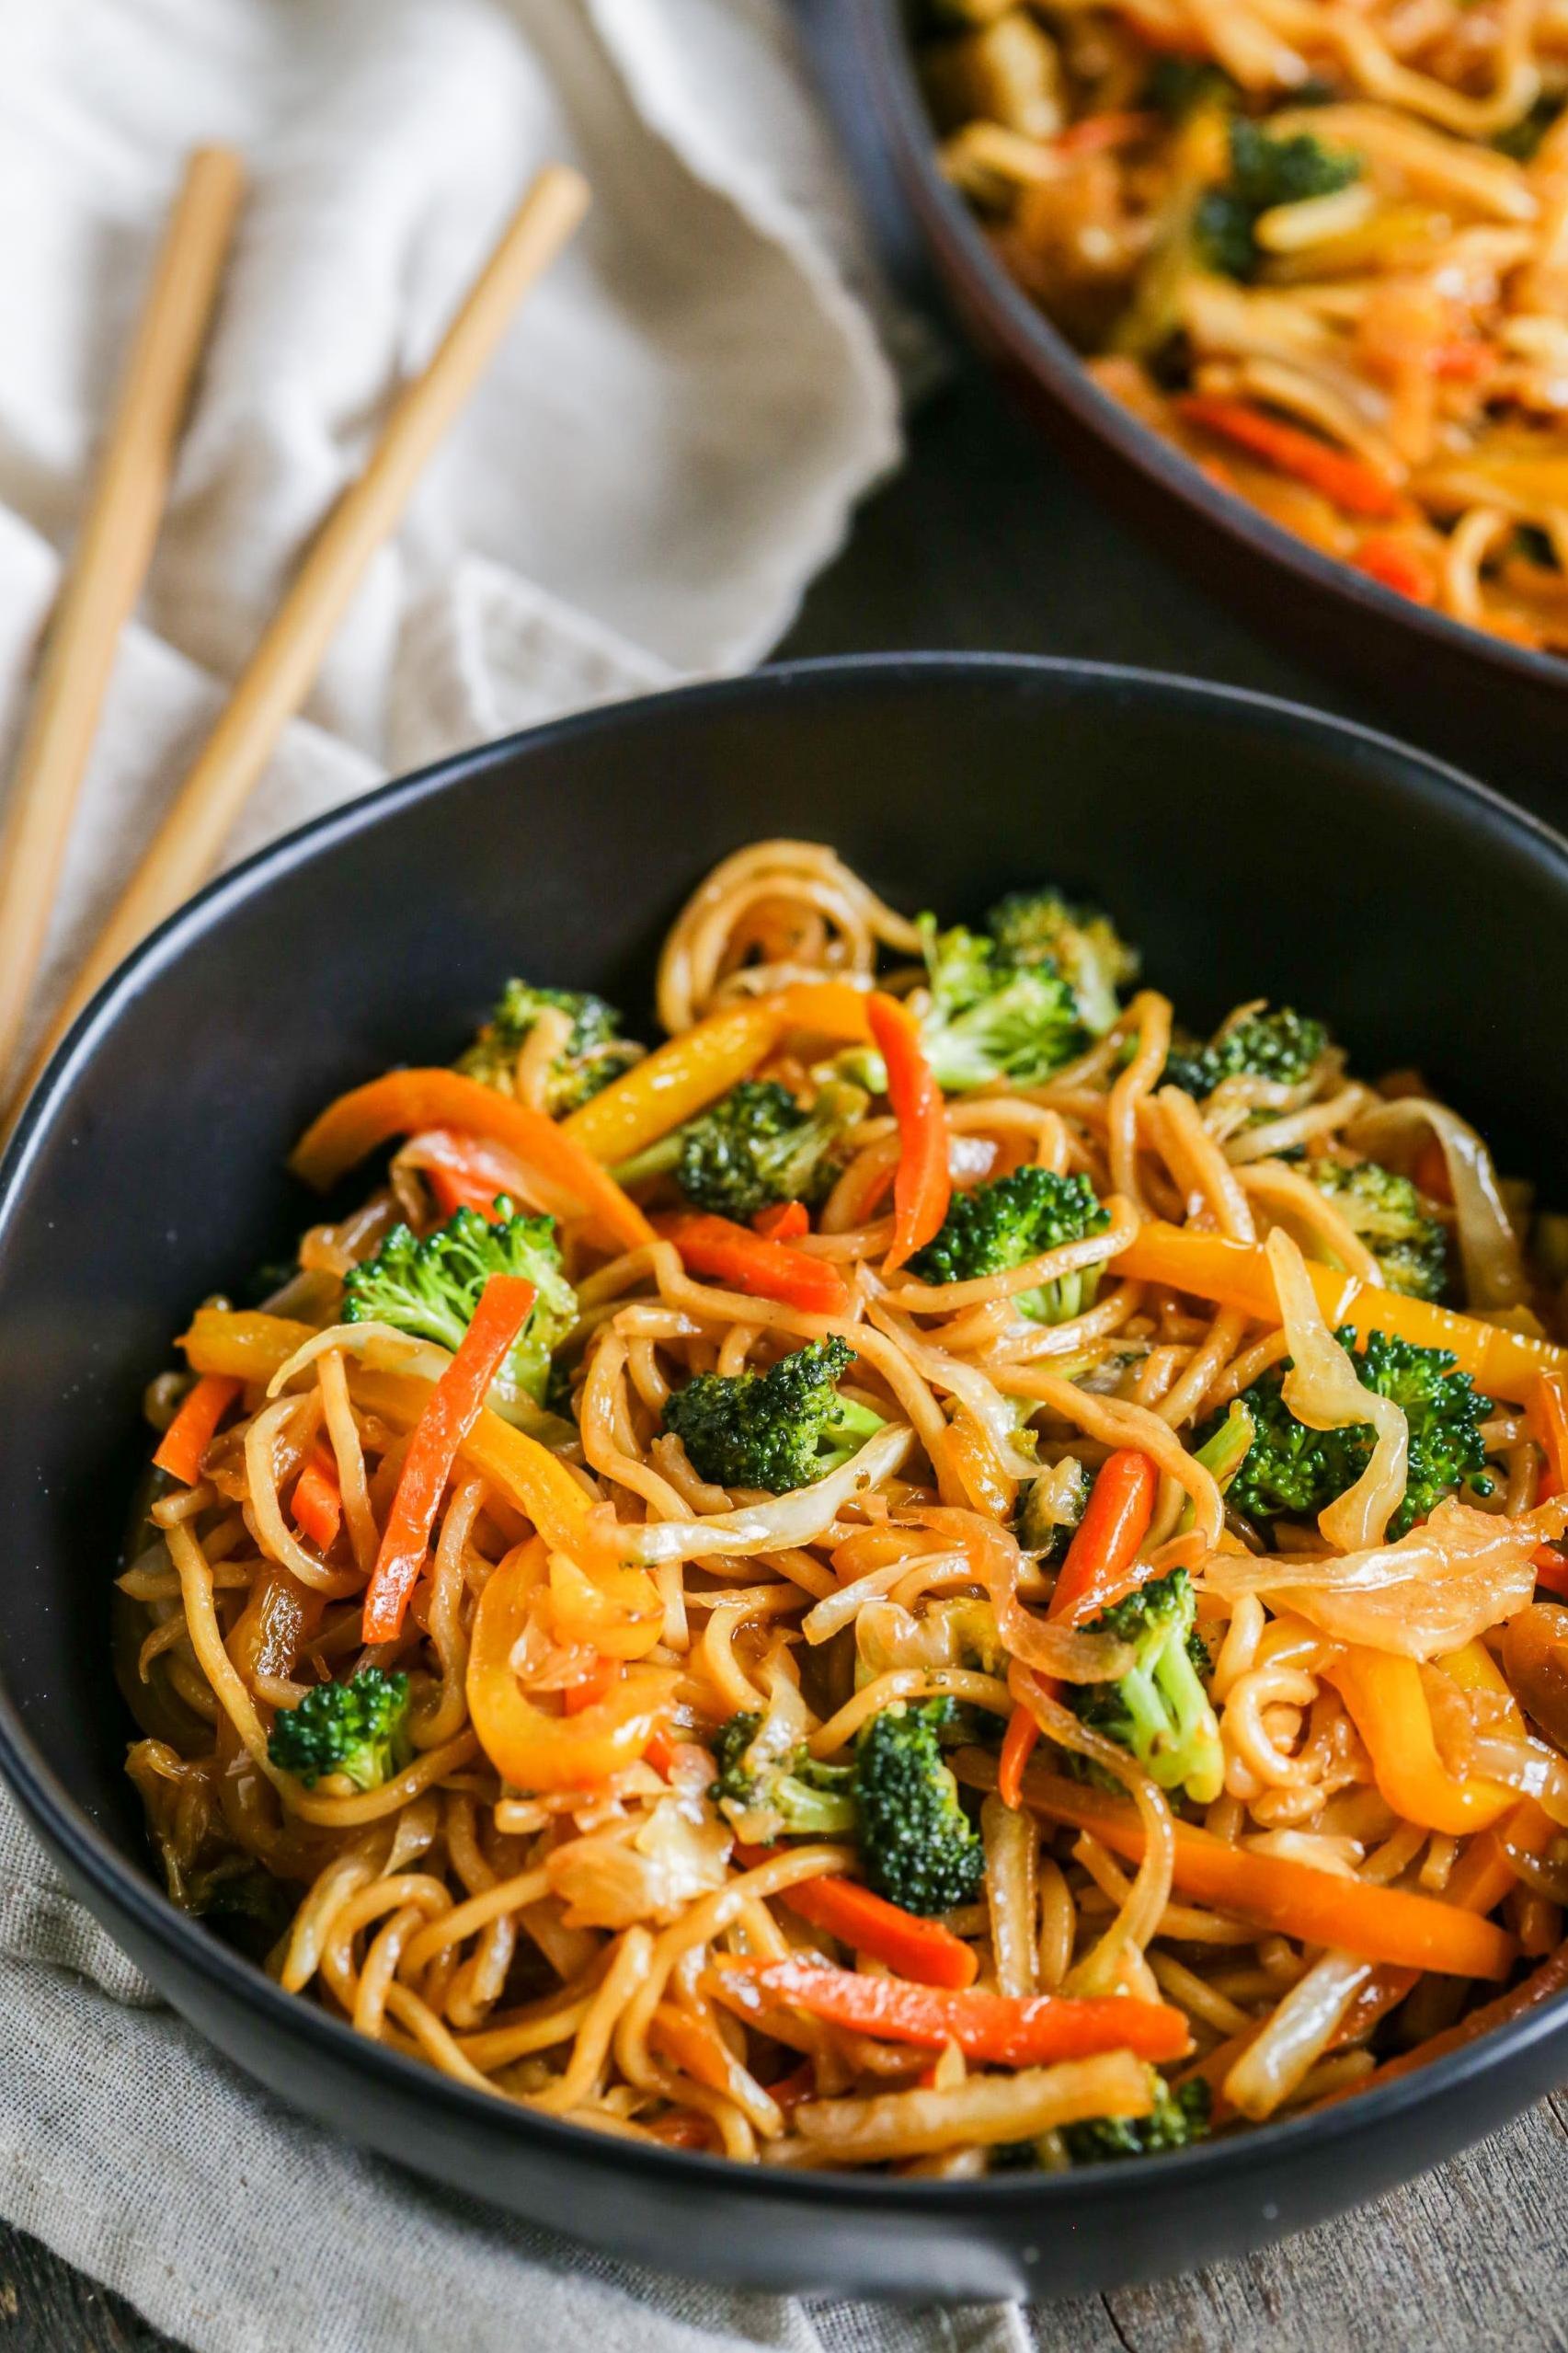  Sizzle, stir-fry, and savory goodness! Yakisoba is always a hit!